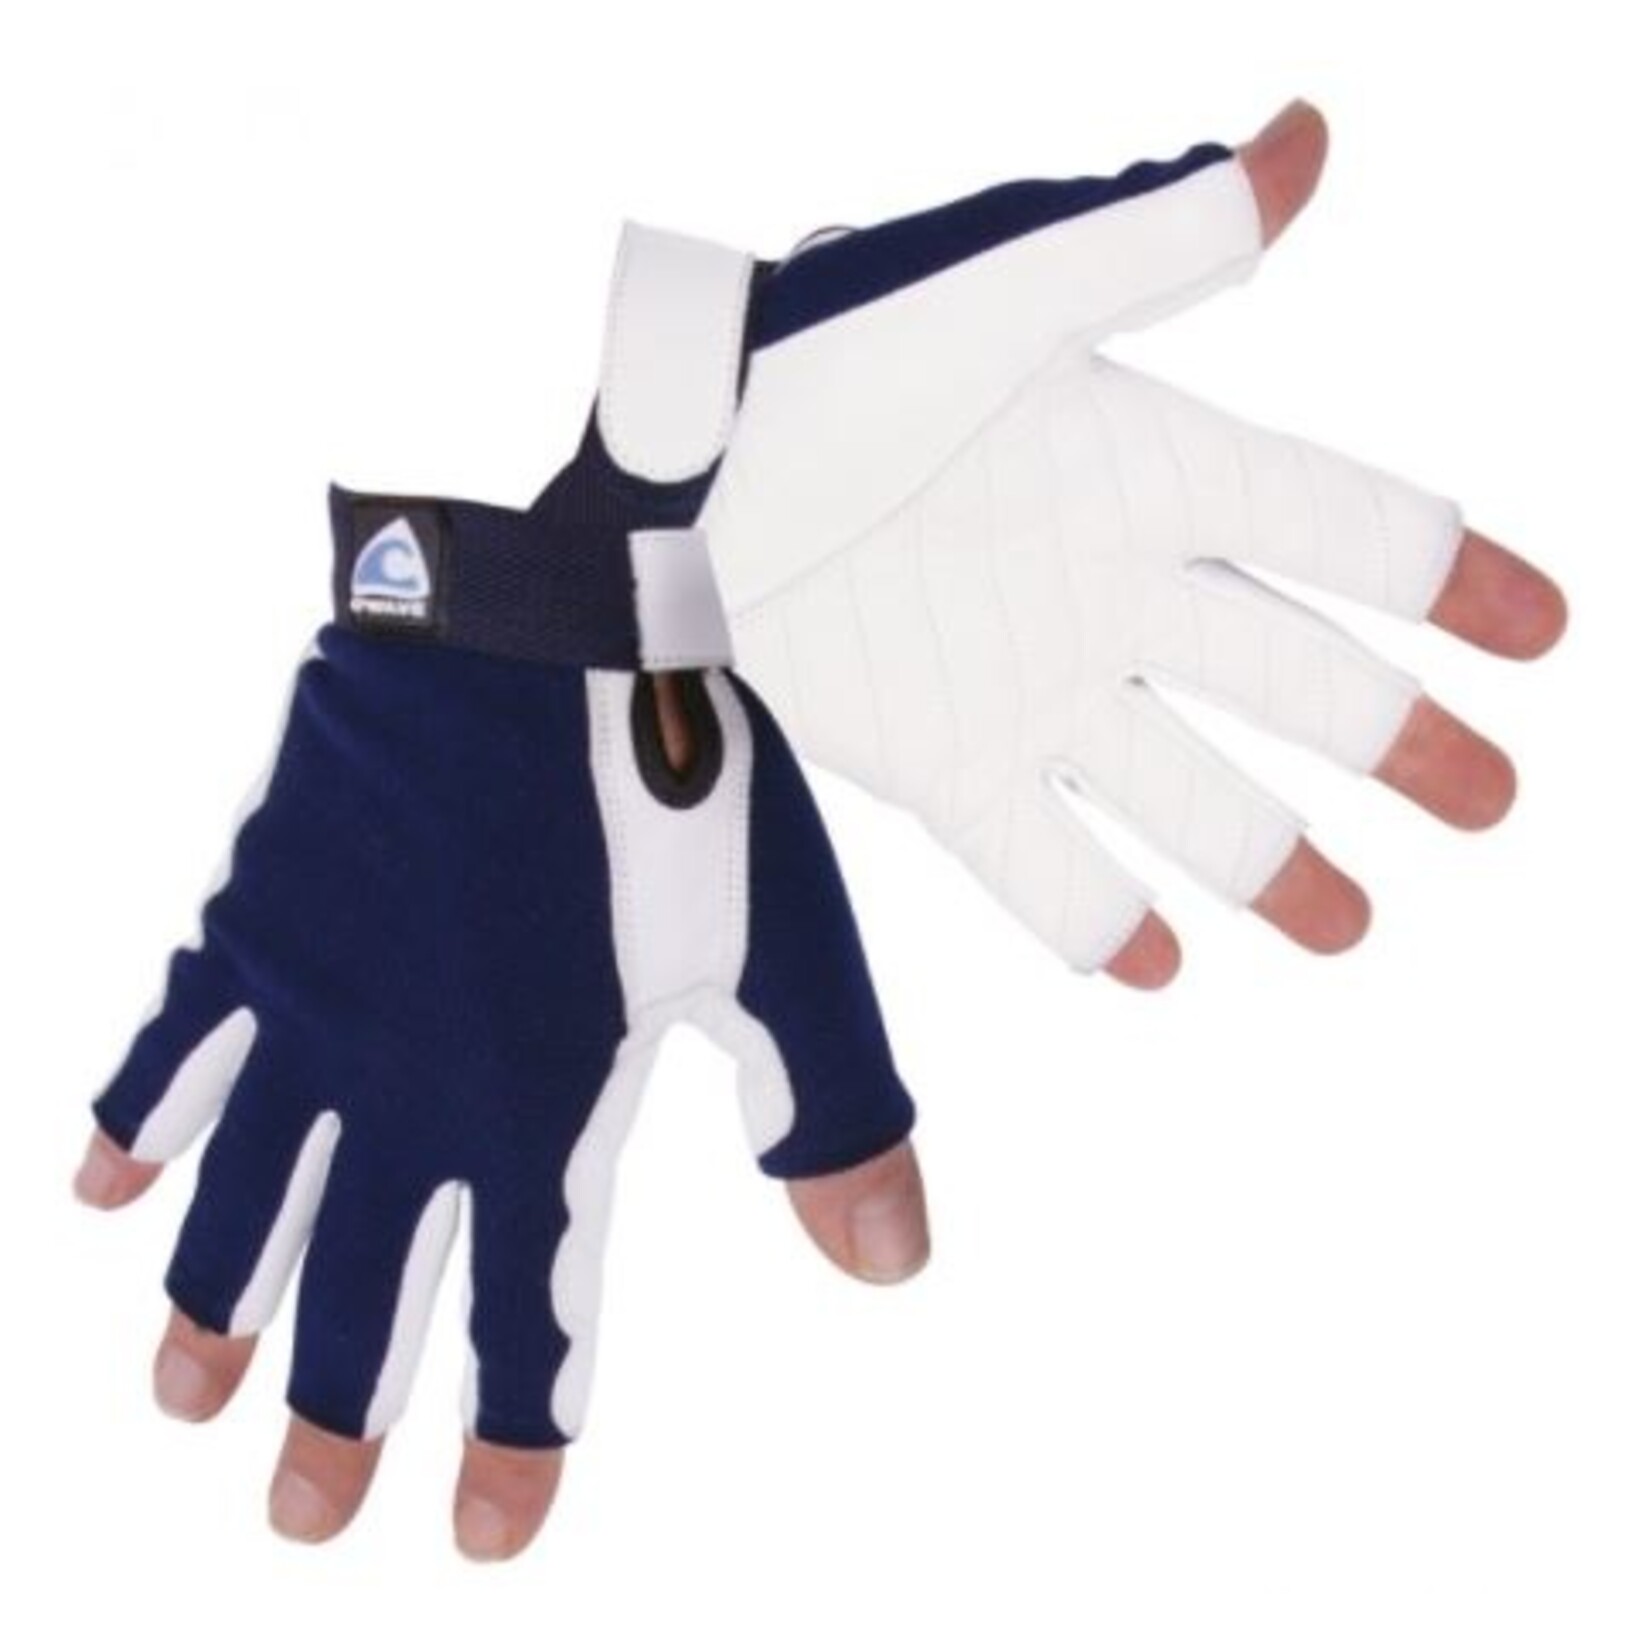 Plastimo O'wave gloves first+ 5dc m